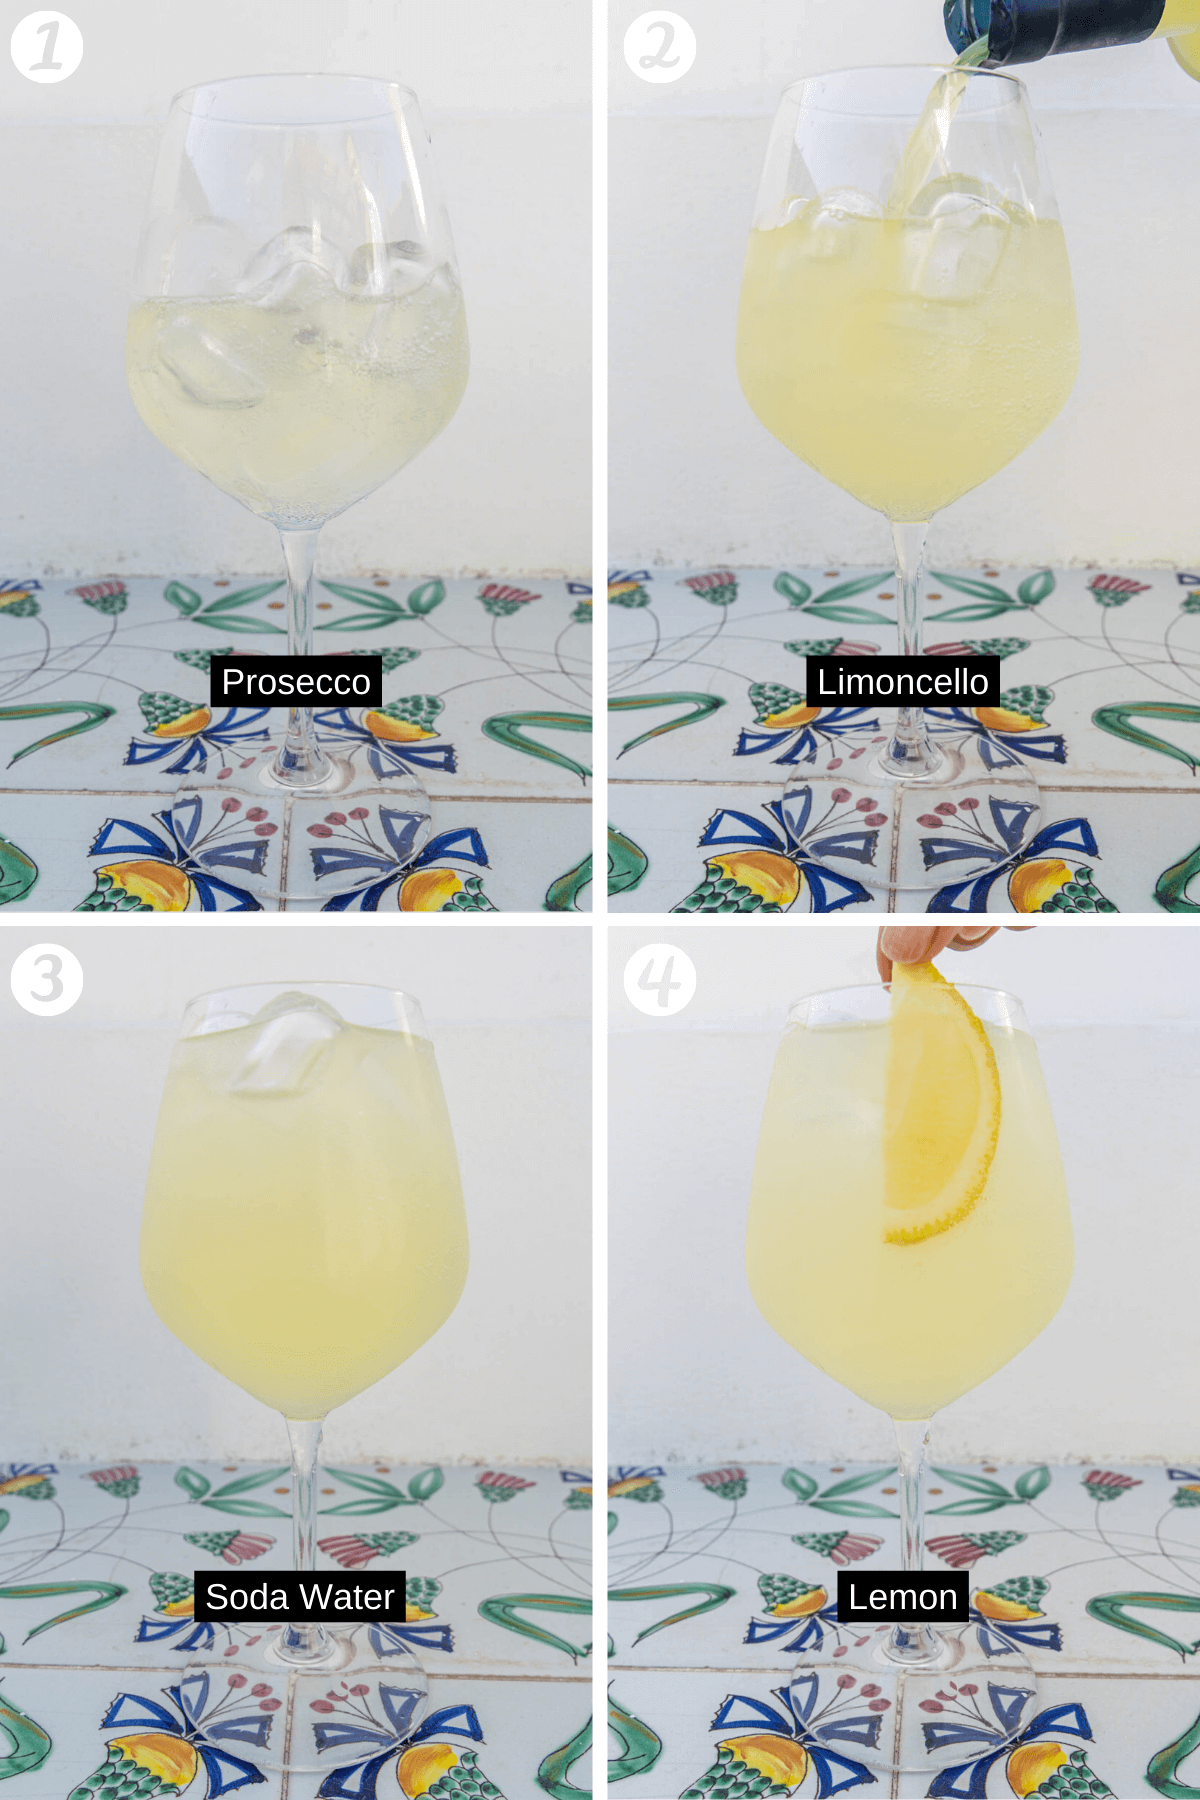 Steps on how to make a Limoncello Spritz